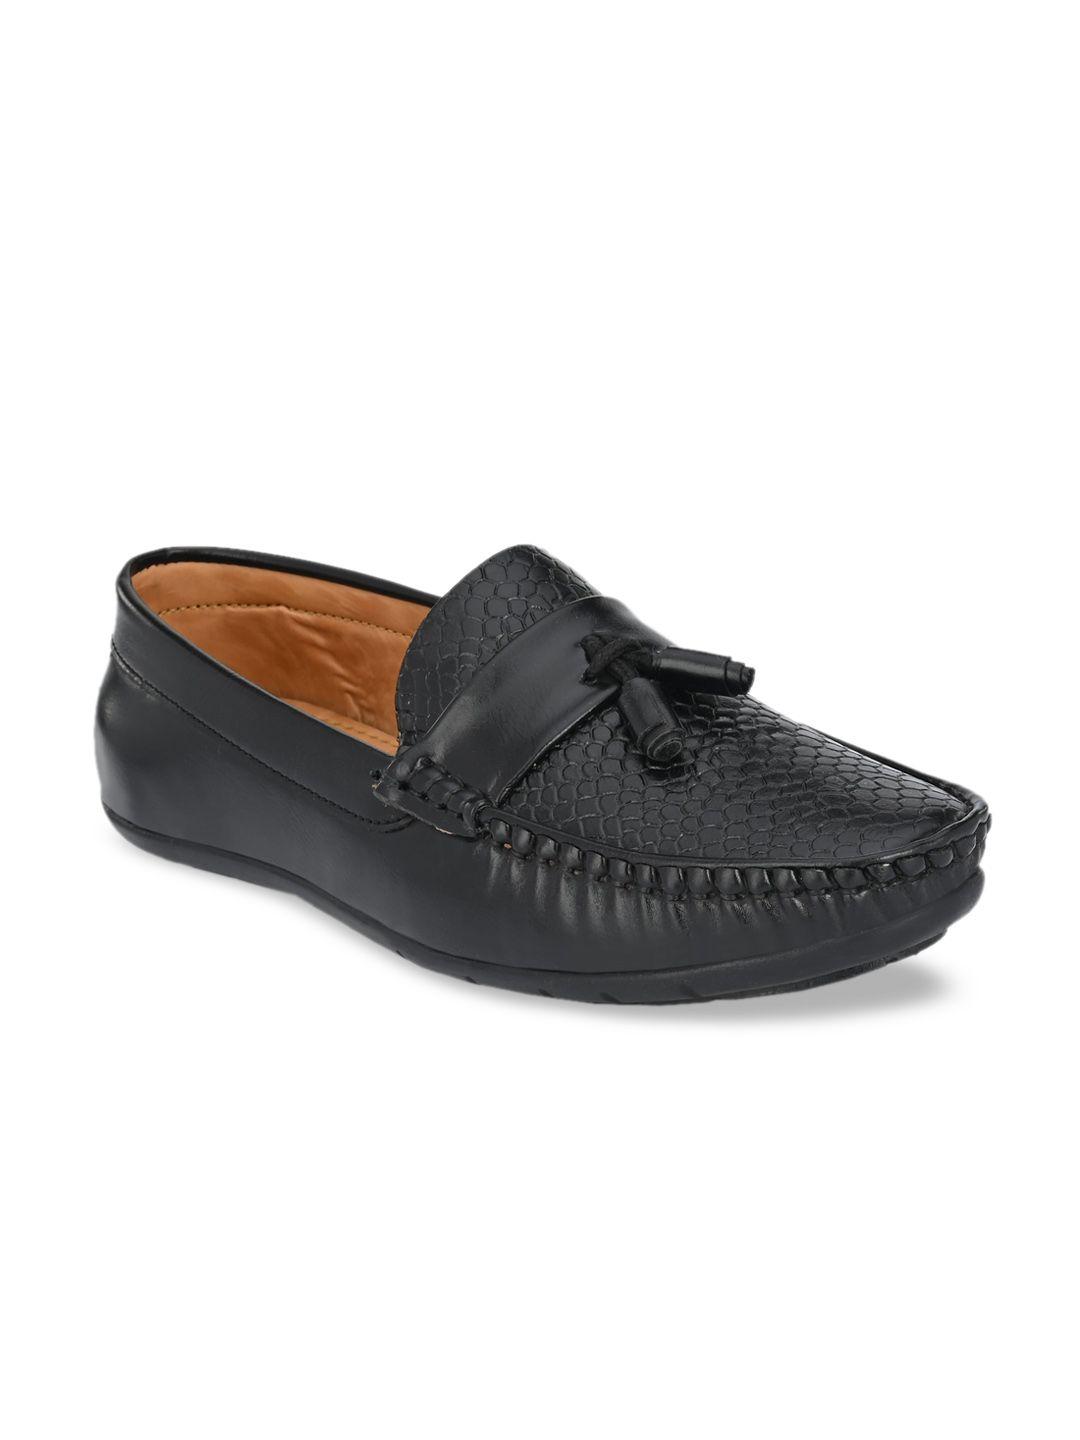 tuskey boys black perforations loafers